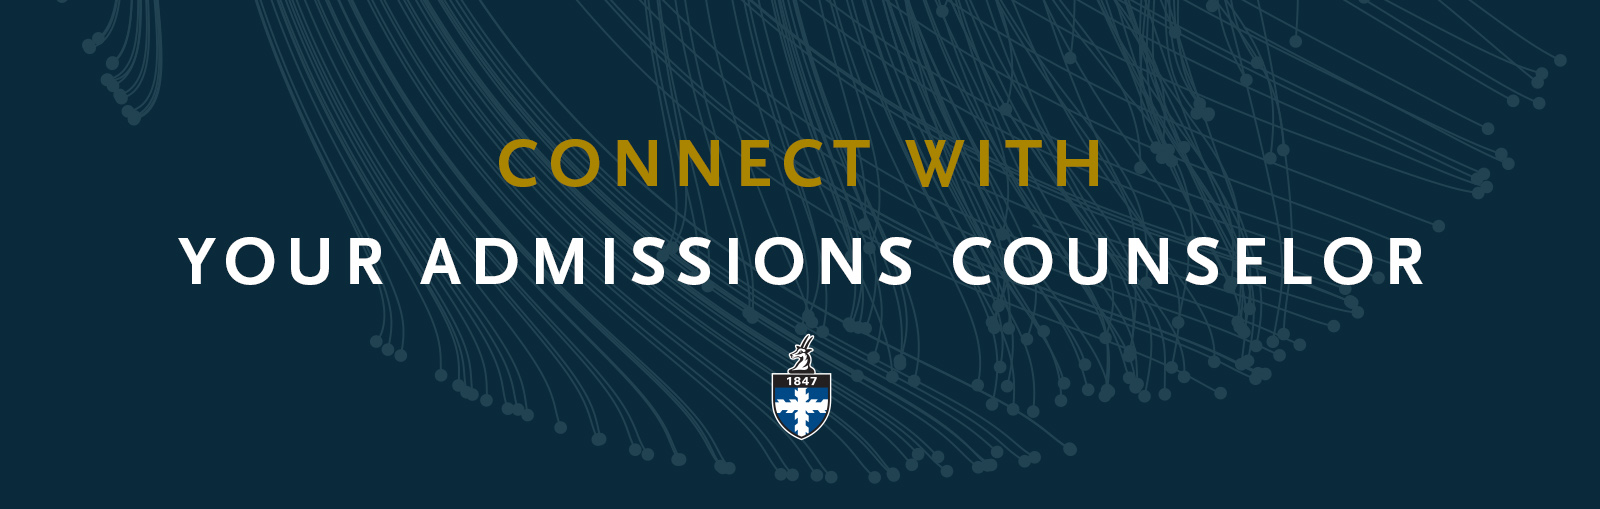 Banner that says "Connect with your admissions counselor"